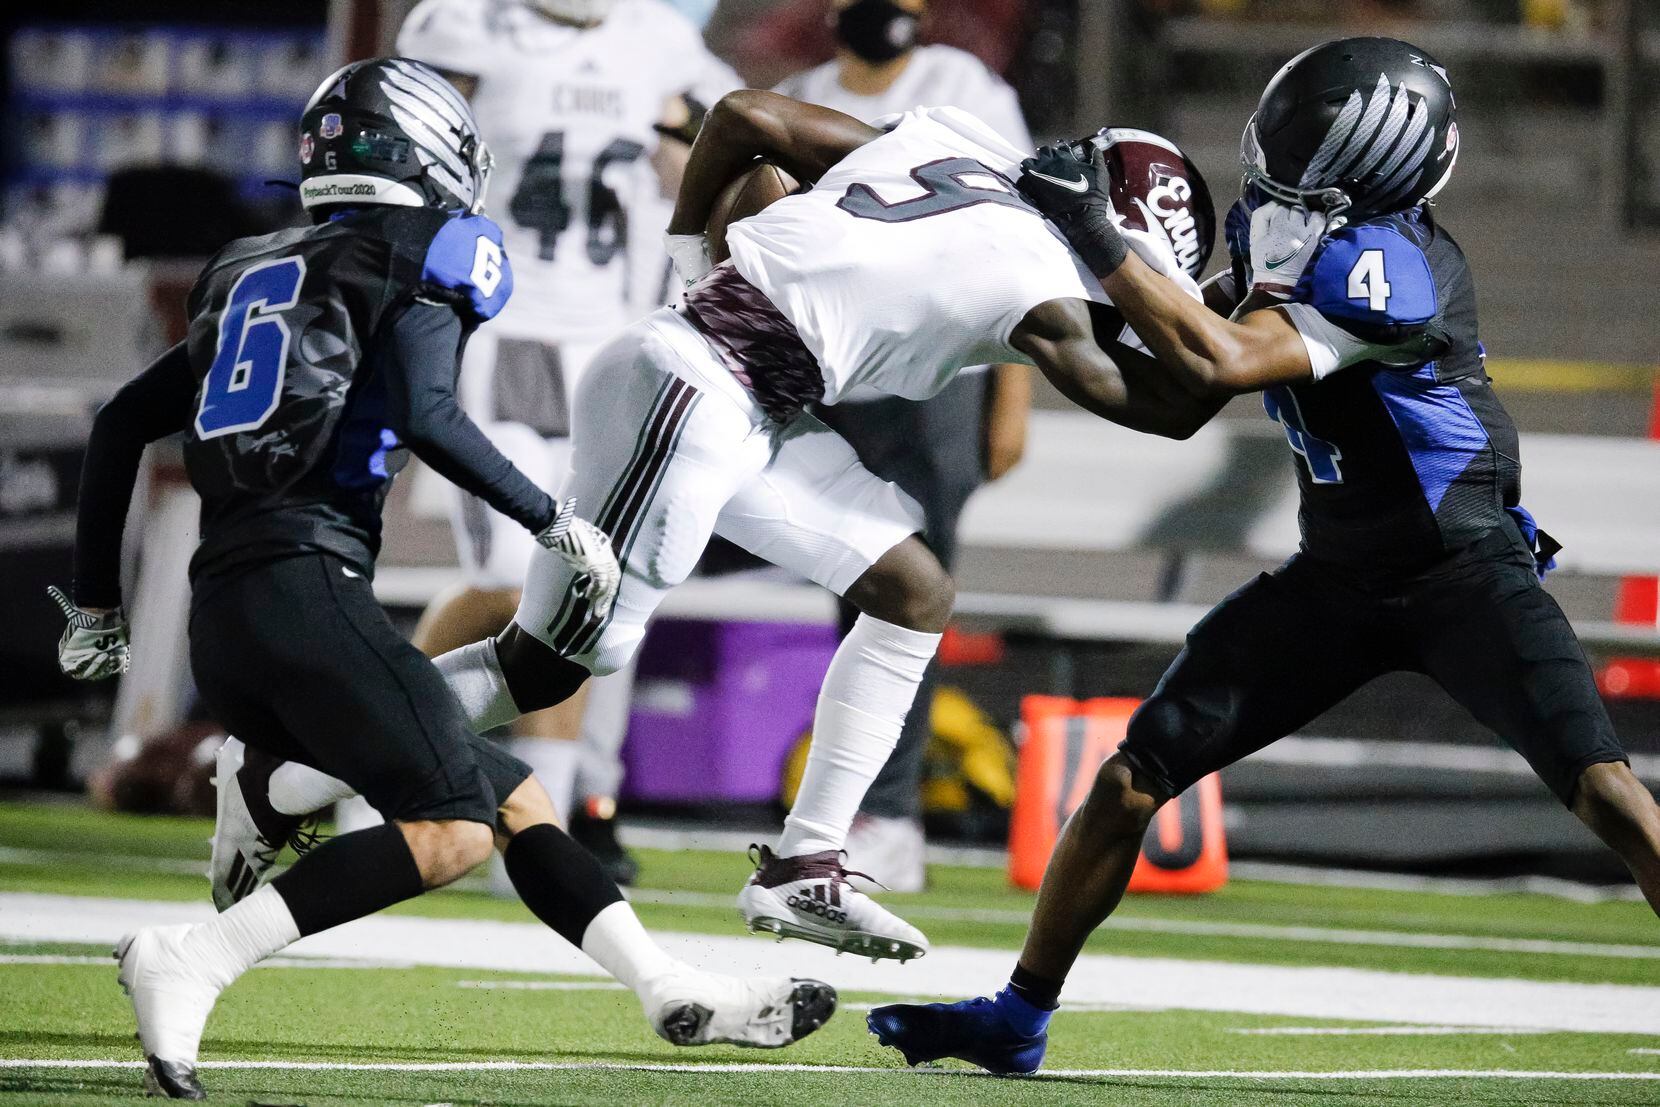 Ennis junior wide receiver Devion Beasley (9) battles North Forney senior defensive back Emarlyee Stewart (4) for space during the first half of a high school playoff football game in Forney, Thursday, November 19, 2020. (Brandon Wade/Special Contributor)